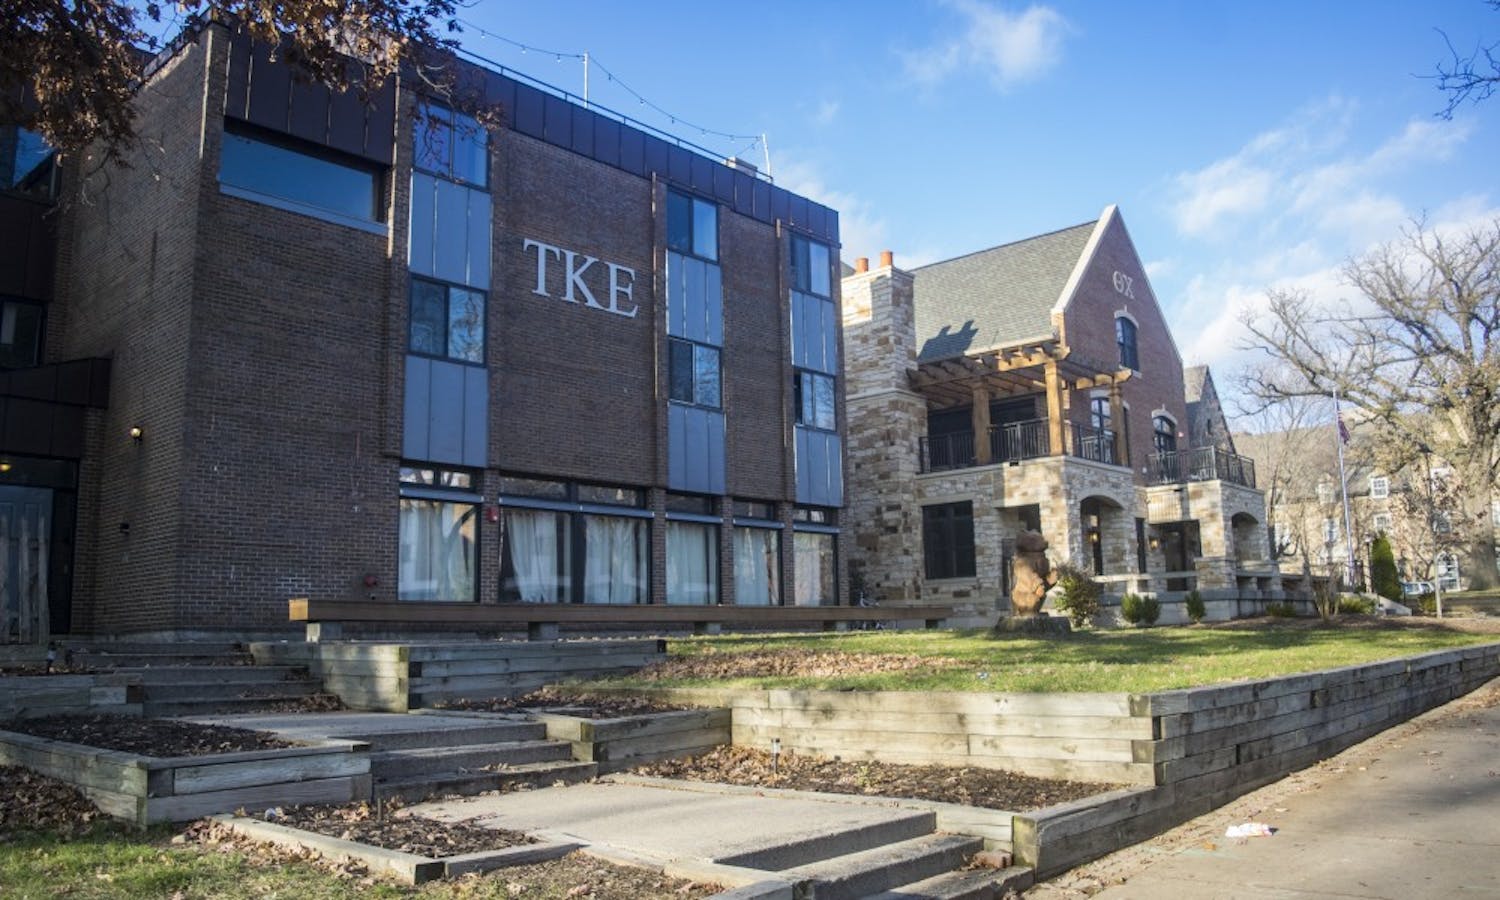 Fraternity members have the opportunity to take&nbsp;Greek Men for Violence Prevention, a two-credit, discussion-driven course where students learn about masculinity, gender, the media and violence against women.